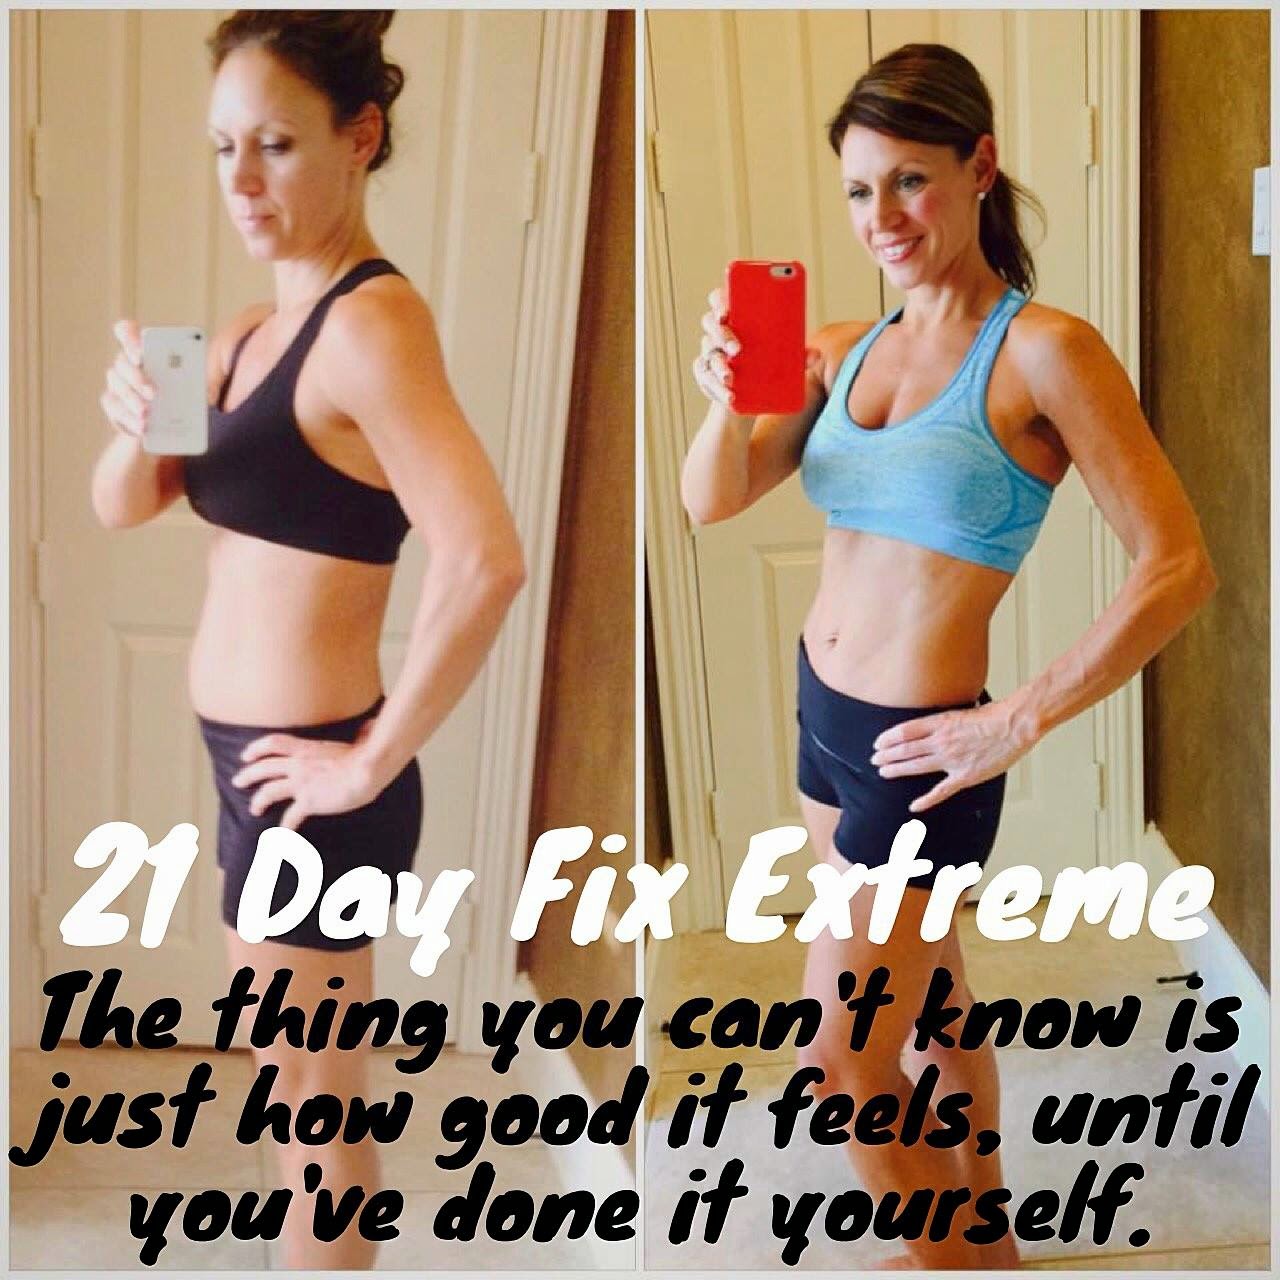 Motivational Mom: 21 Day Fix Extreme